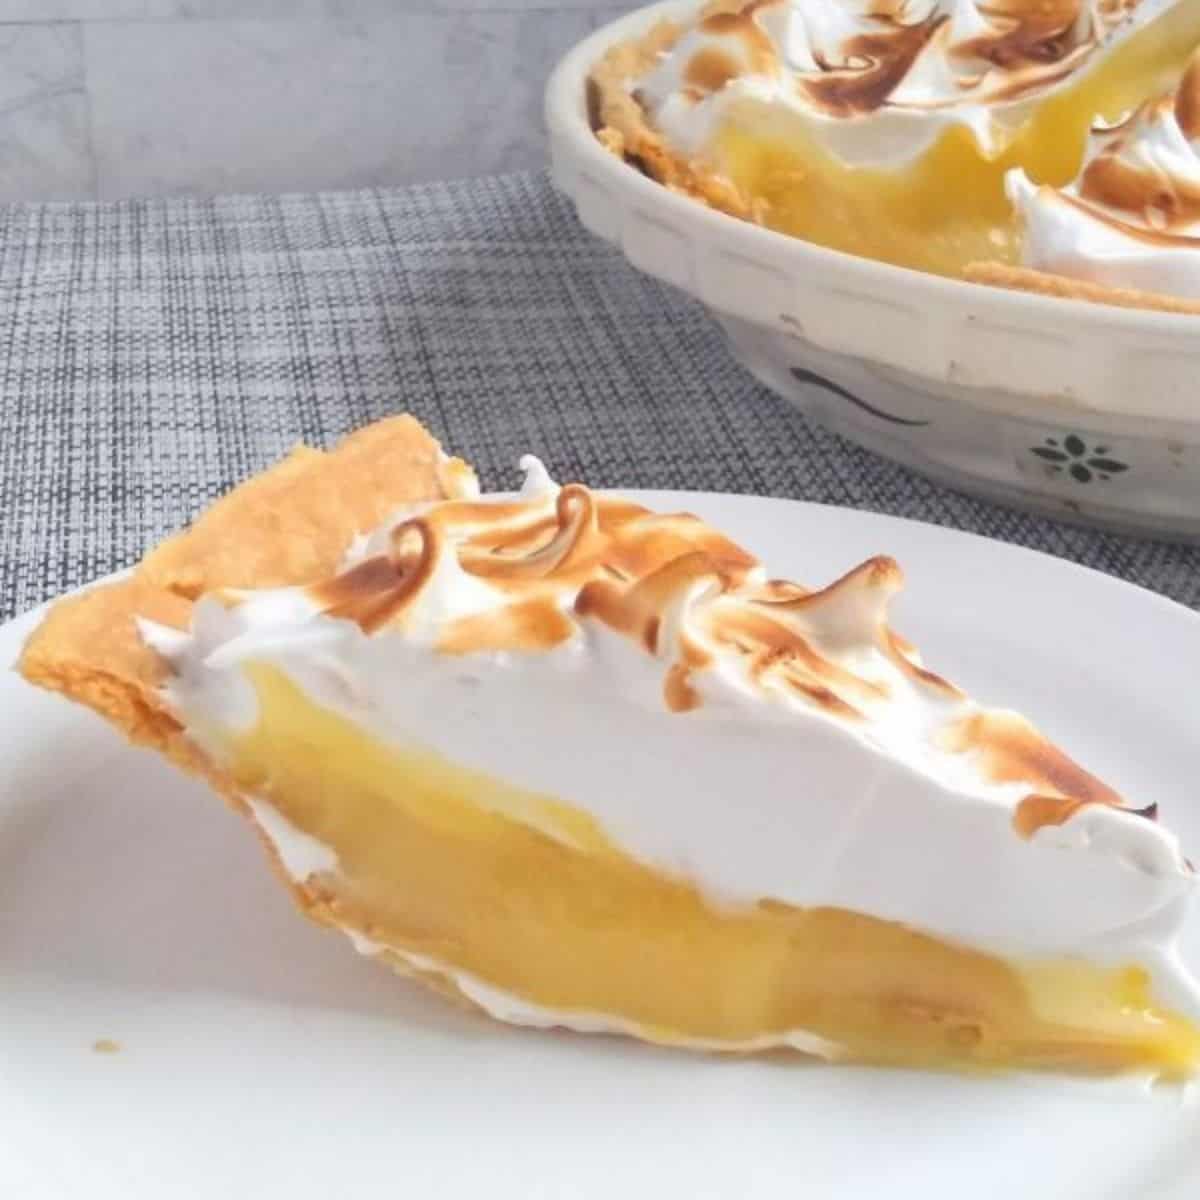 A slice of Lemon Meringue pie that has been torched on top sitting on a white plate with the whole pie in the background.